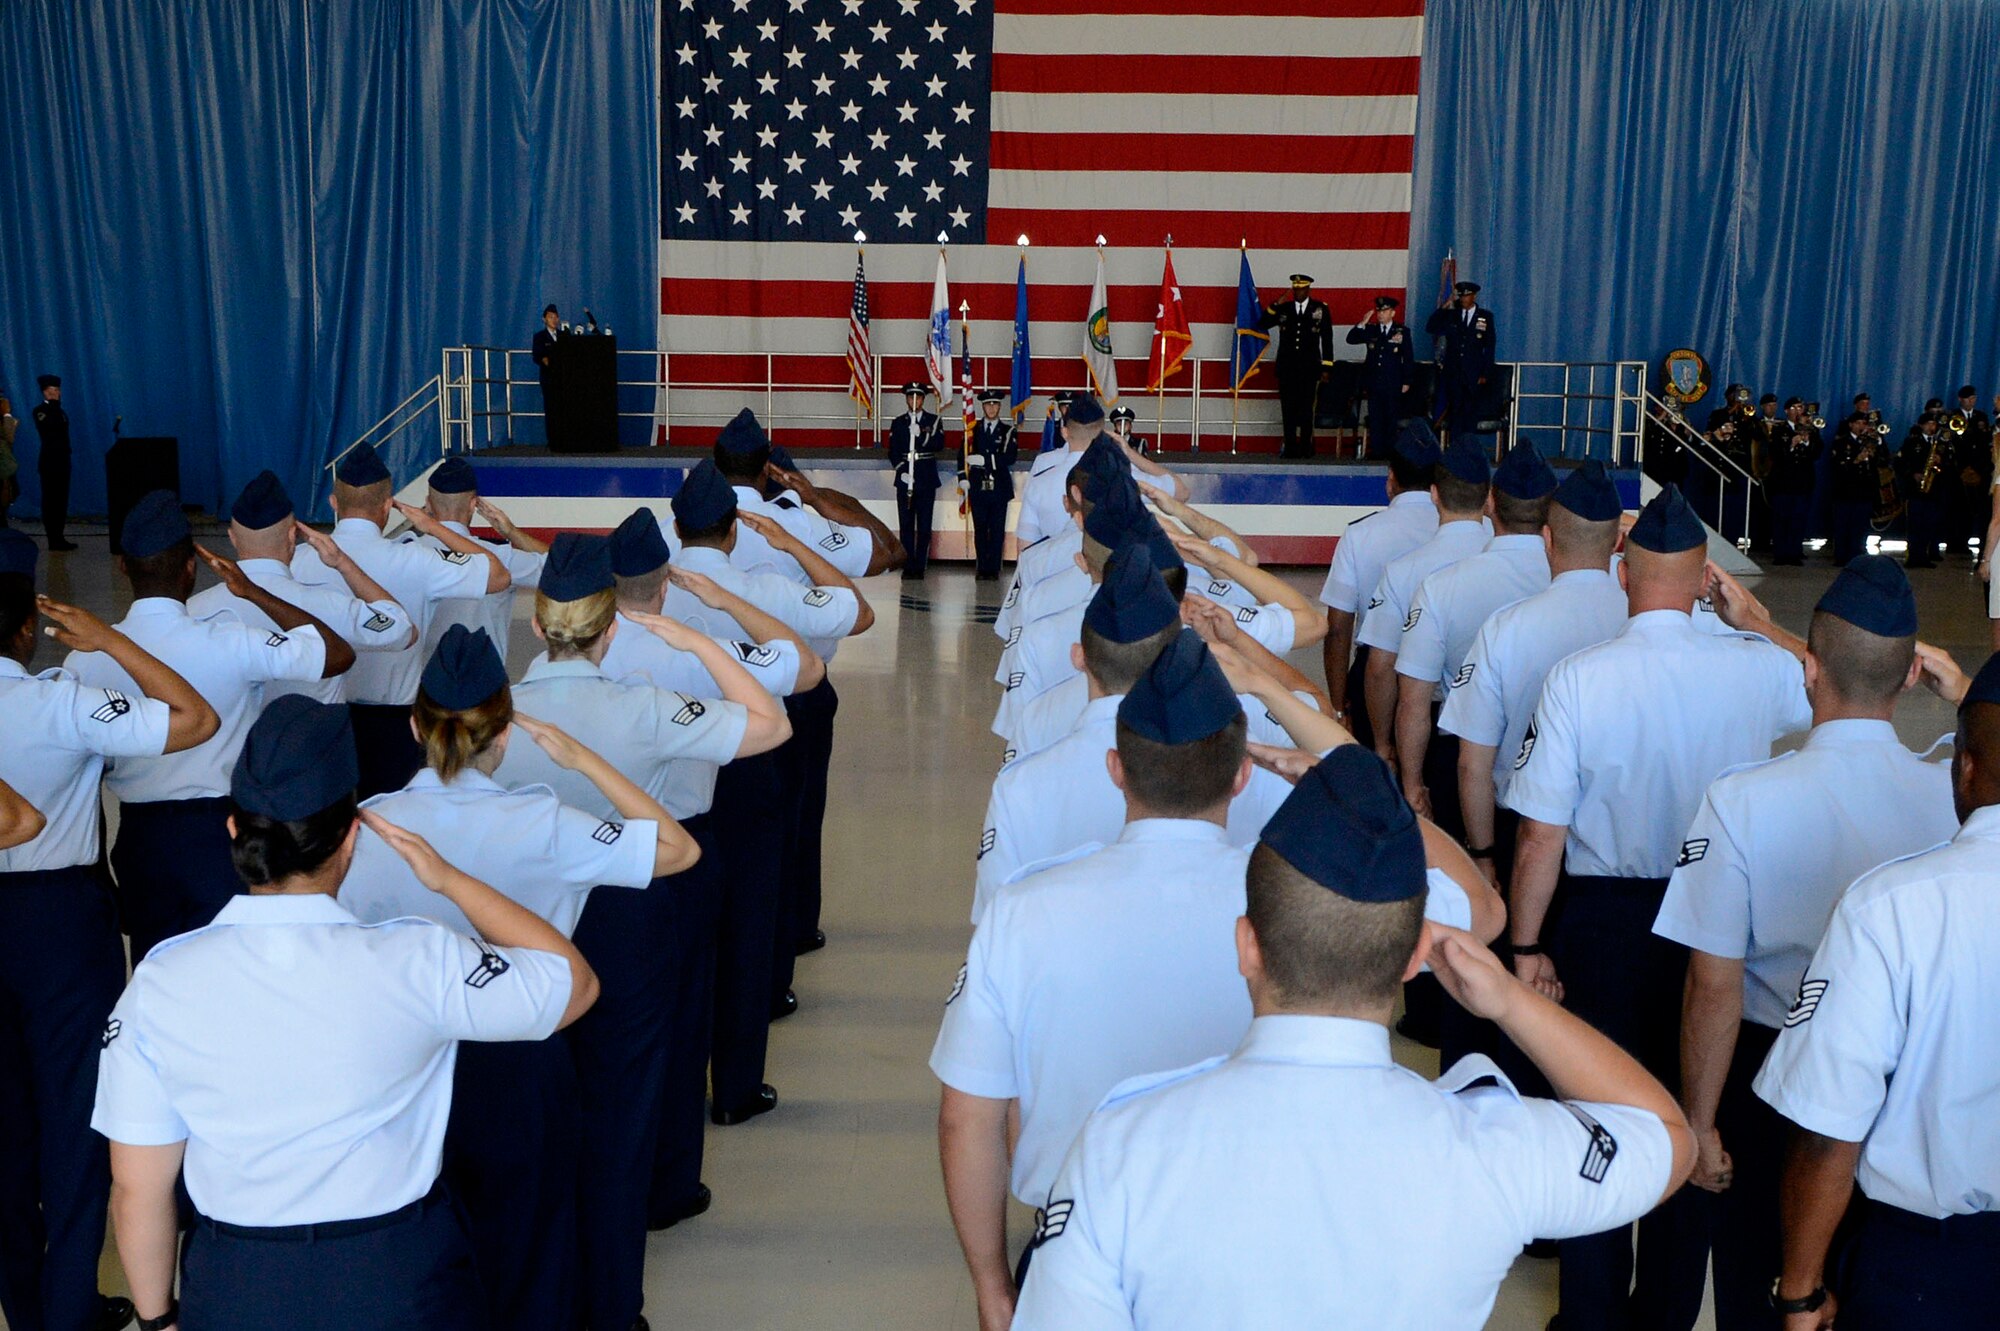 U.S. Air Forces Central Command Airmen render salutes during the USAFCENT change of command ceremony at Shaw Air Force Base, S.C., June 29, 2015.  More than 300 service members and community leaders attended the ceremony to welcome the incoming commander, Lt. Gen. Charles Q. Brown Jr. (U.S. Air Force photo by Senior Airman Jensen Stidham/Released) 